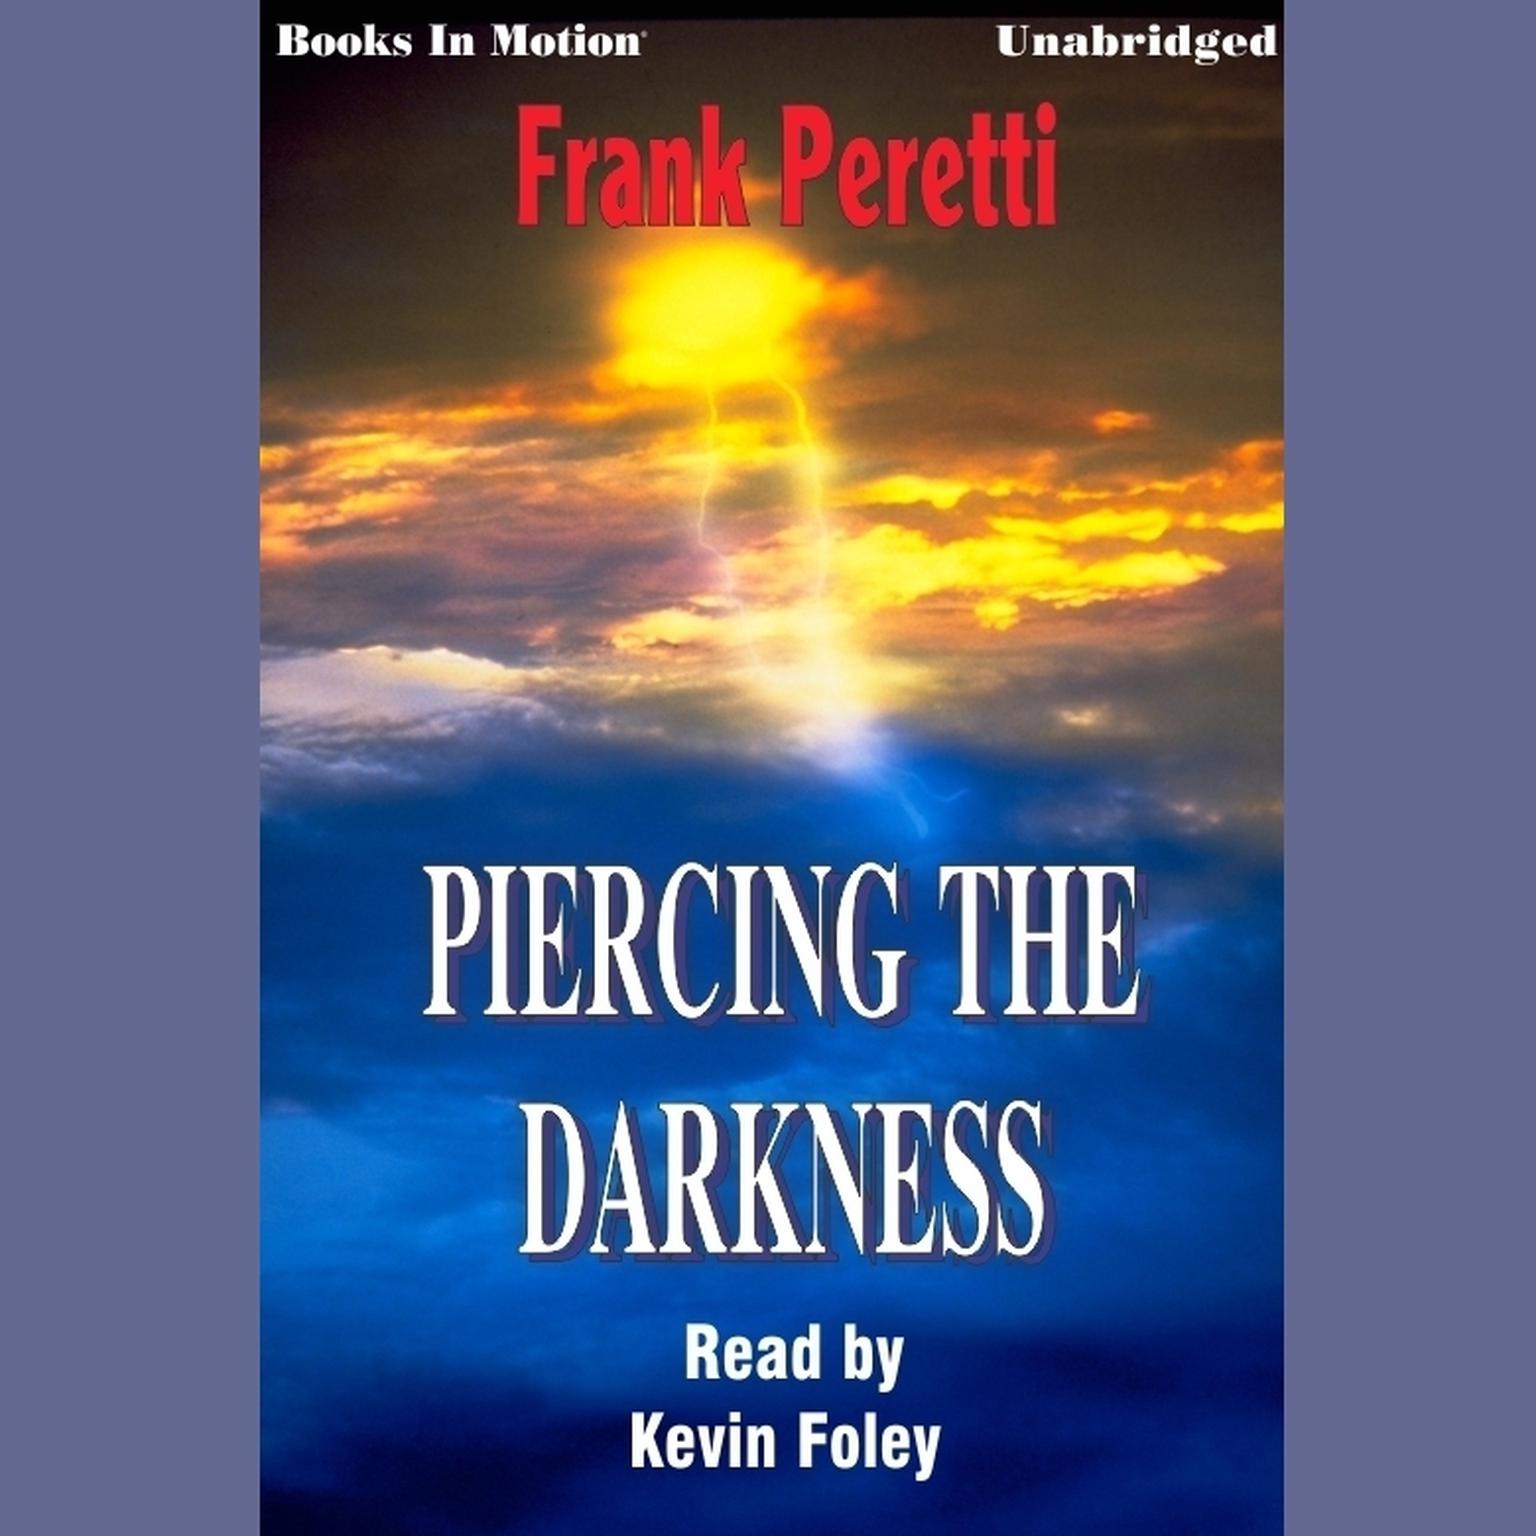 Piercing the Darkness Audiobook, by Frank E. Peretti